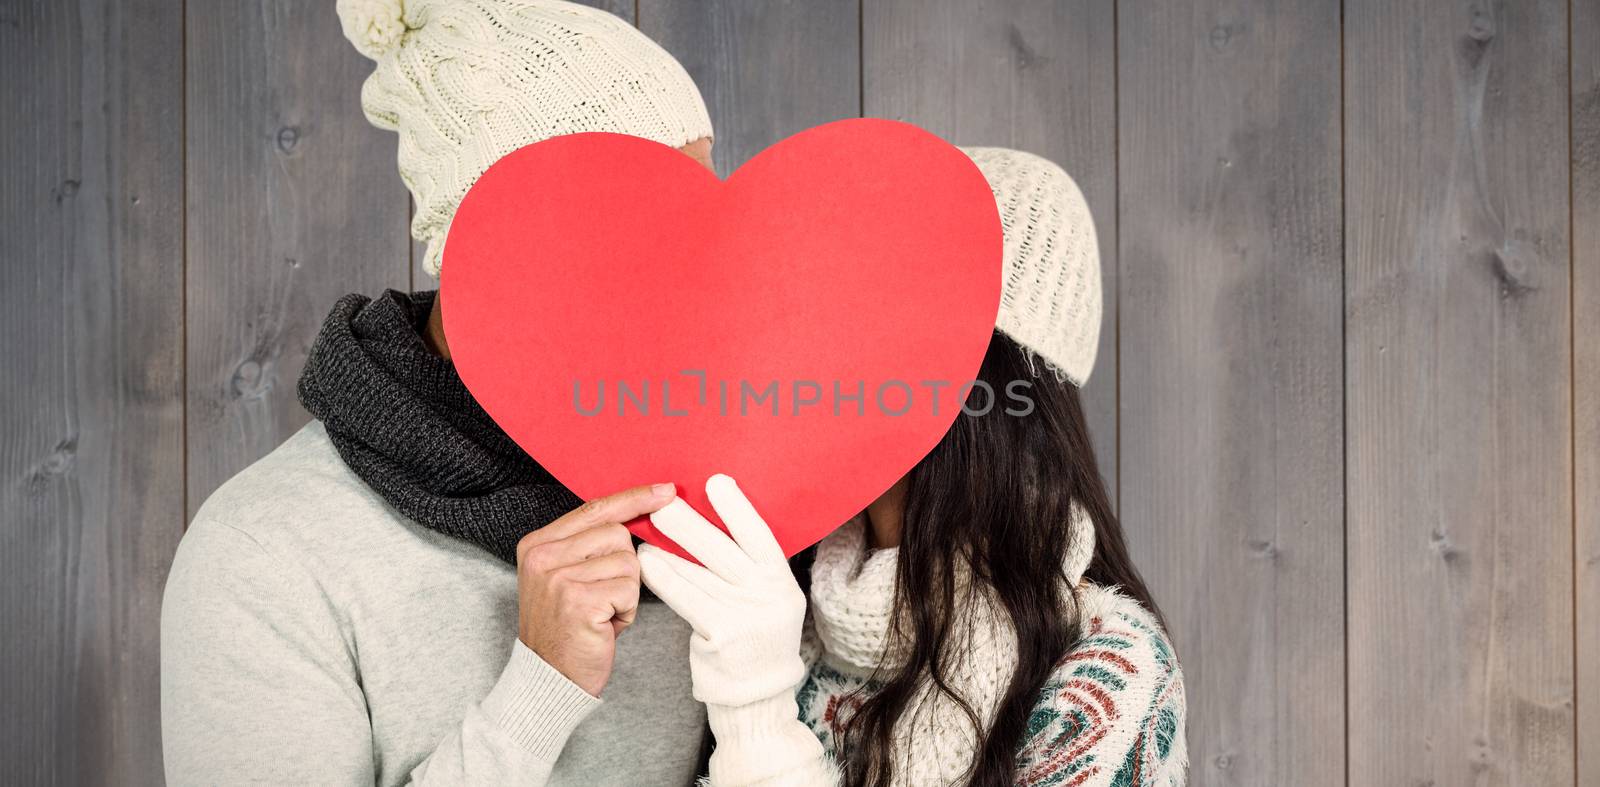 Smiling couple holding paper heart against wooden planks